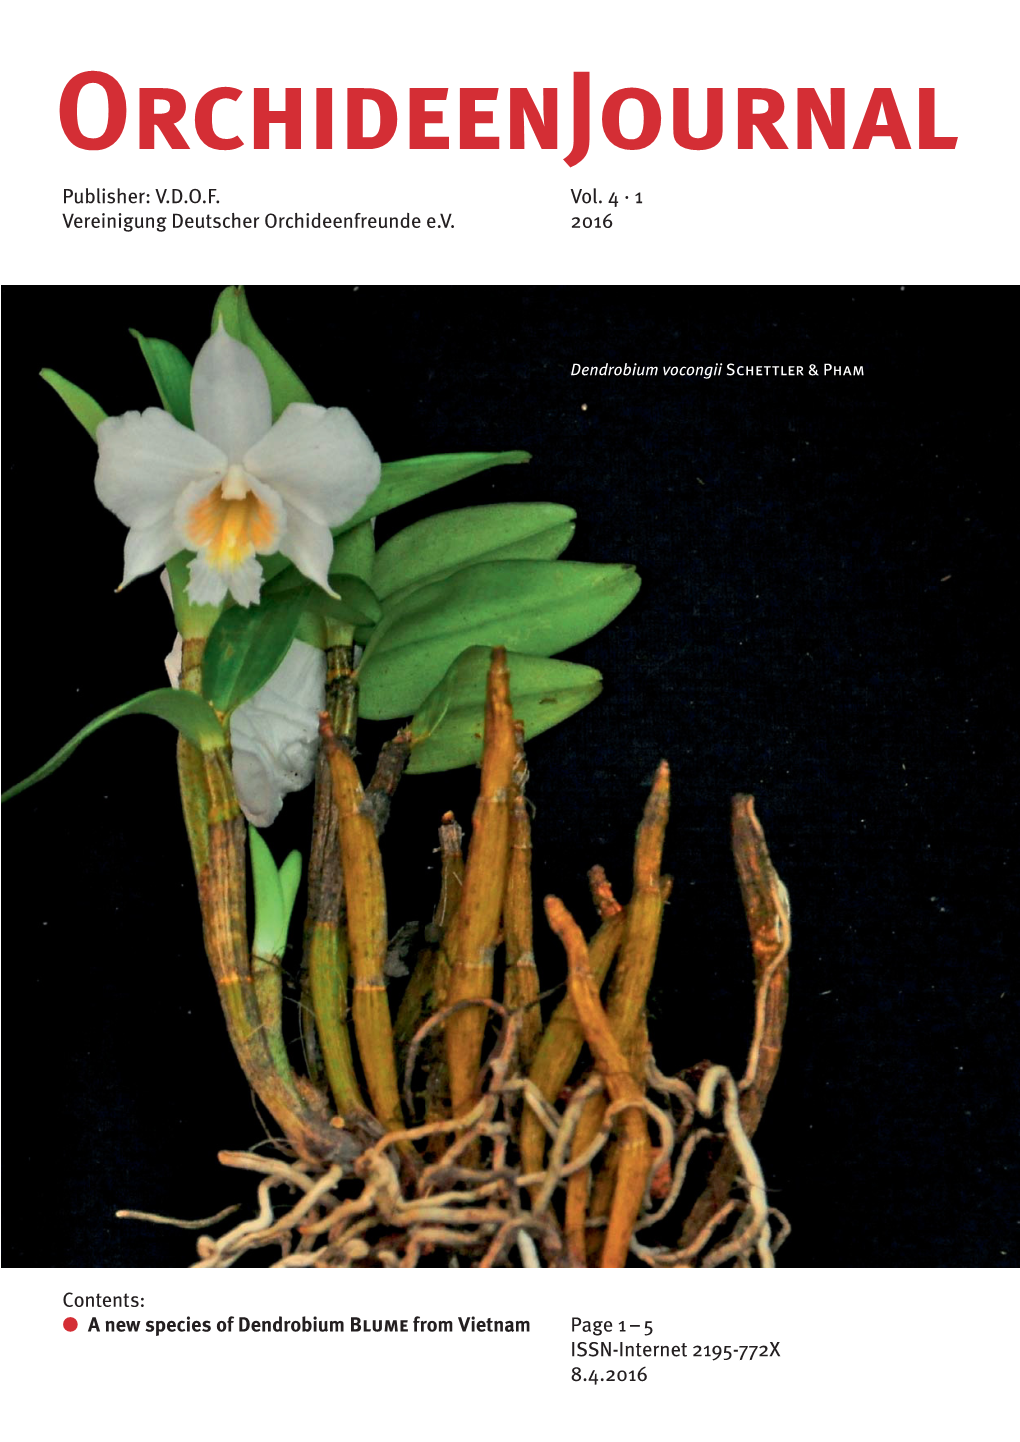 A New Species of Dendrobium Blume from Vietnam Page 1 – 5 ISSN-Internet 2195-772X 8.4.2016 Orchideenjournal Internet | Vol